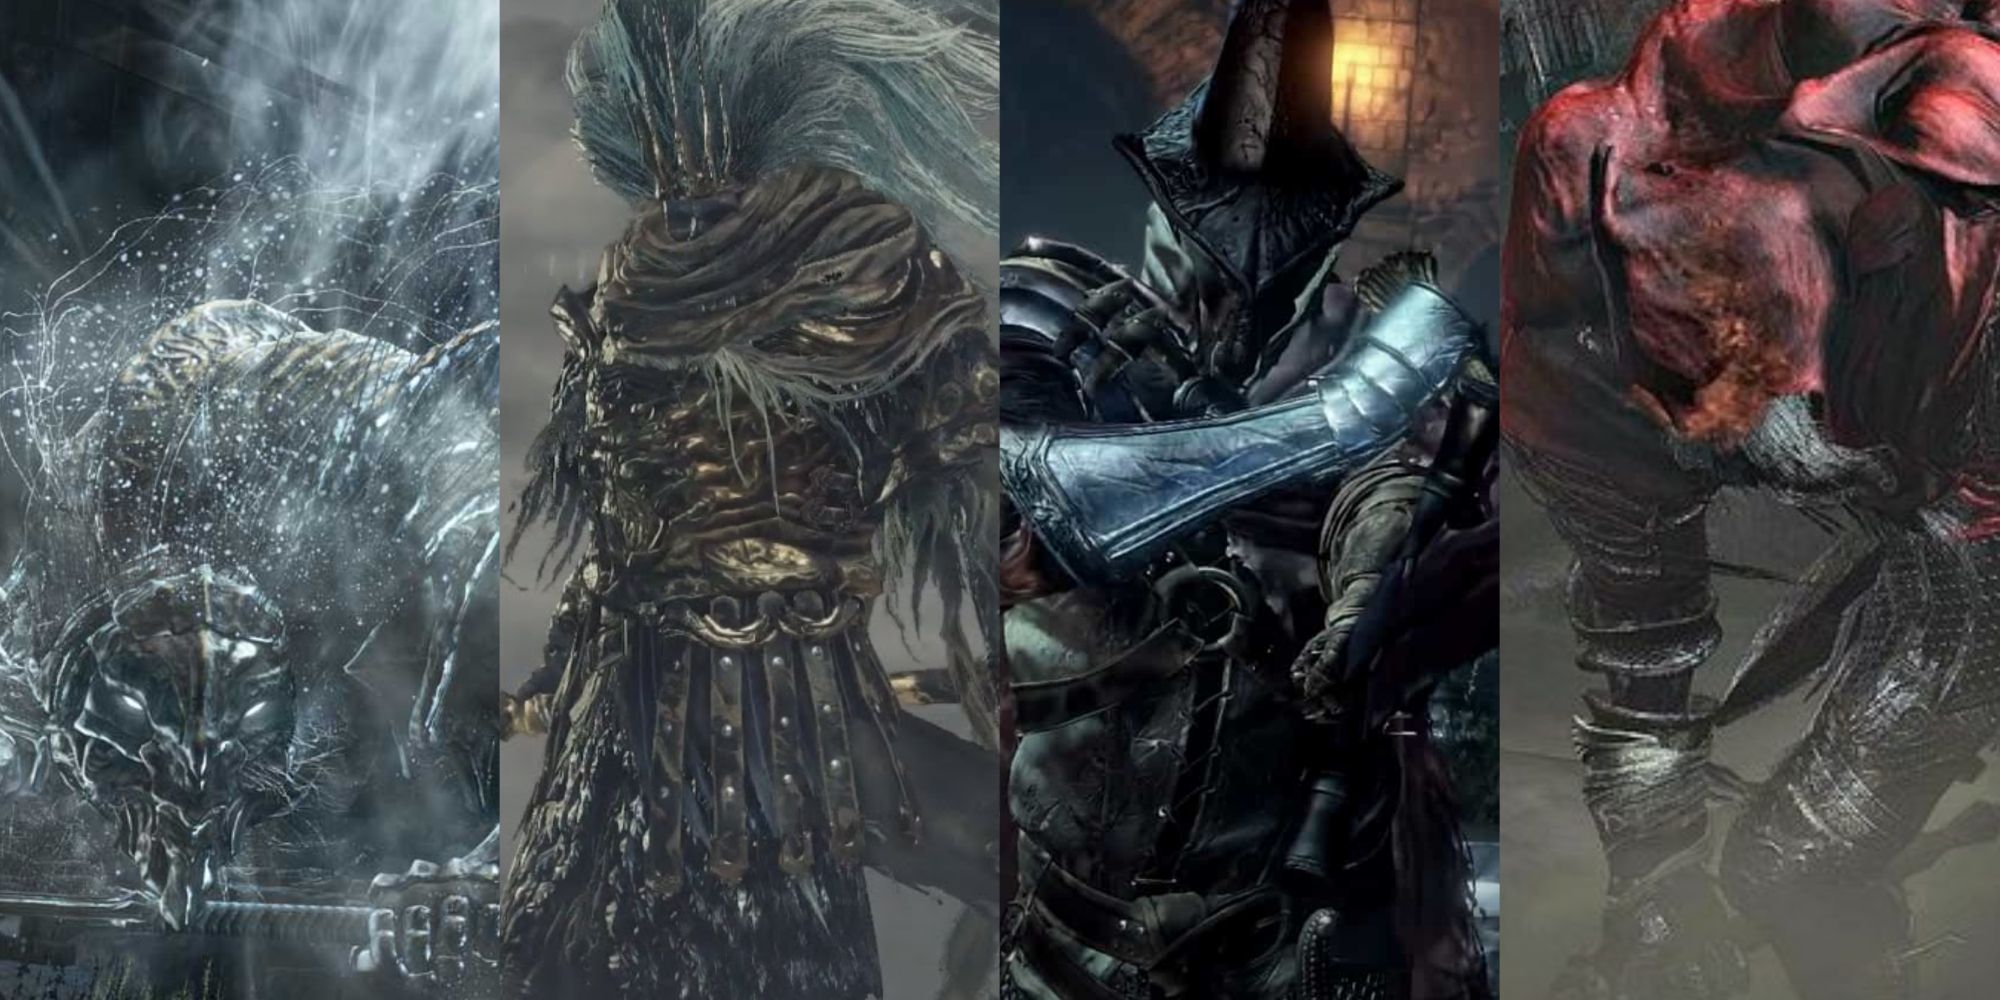 Vordt, Nameless King, Abyss Watcher, and Knight Gael.